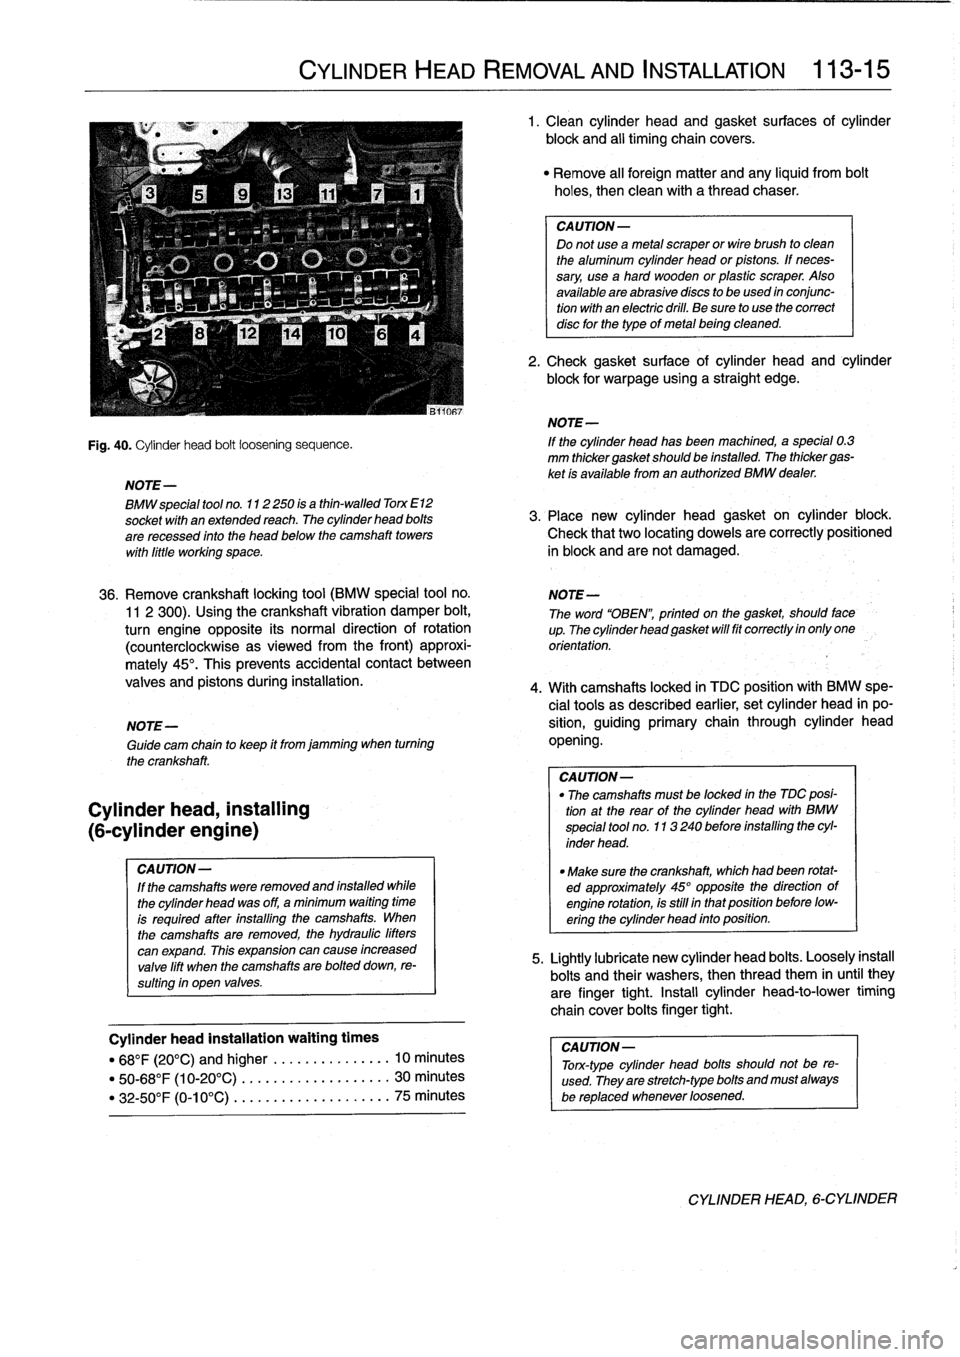 BMW 323i 1998 E36 Workshop Manual 
NOTE-

Cylinder
head,
installing

(6-cylinder
engine)

CAUTION-

If
the
camshafts
were
removed
and
installed
while

the
cylinder
head
was
off,
a
minimum
waiting
time

is
required
after
ínstalling
th